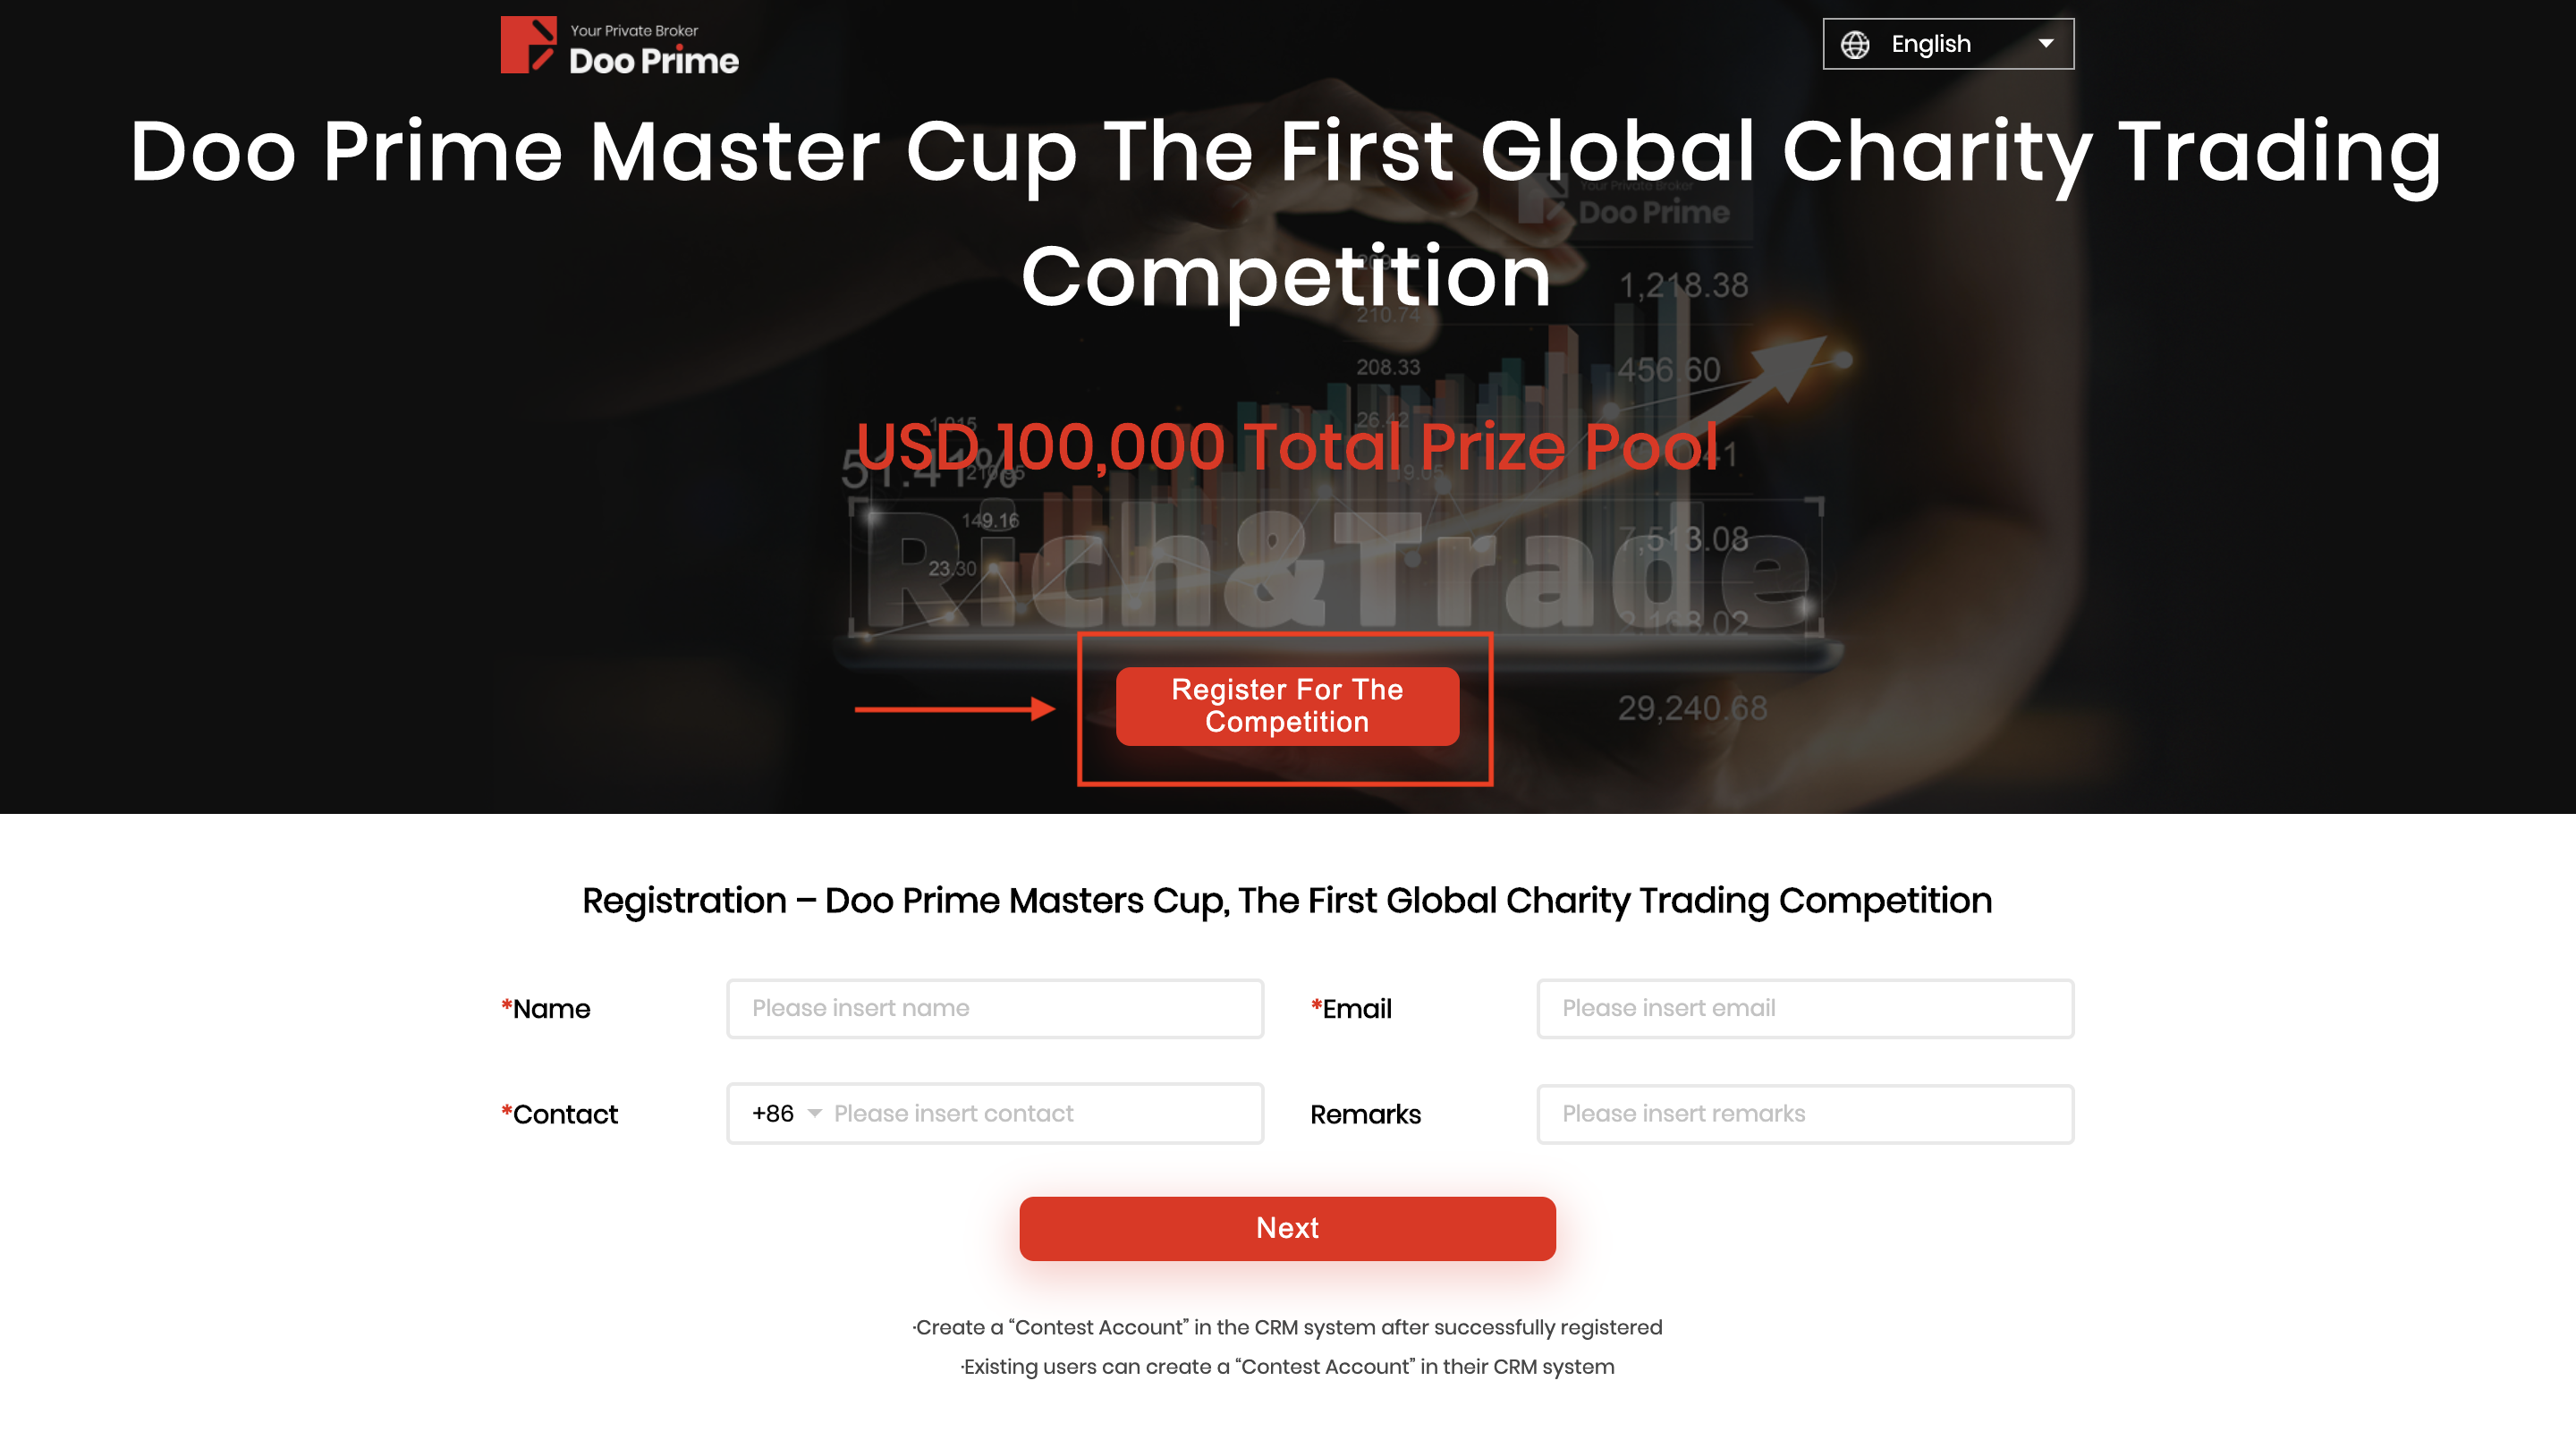 Doo Prime to Host The First Global Charity Competition - Doo Prime Masters Cup | www.dooprime.com